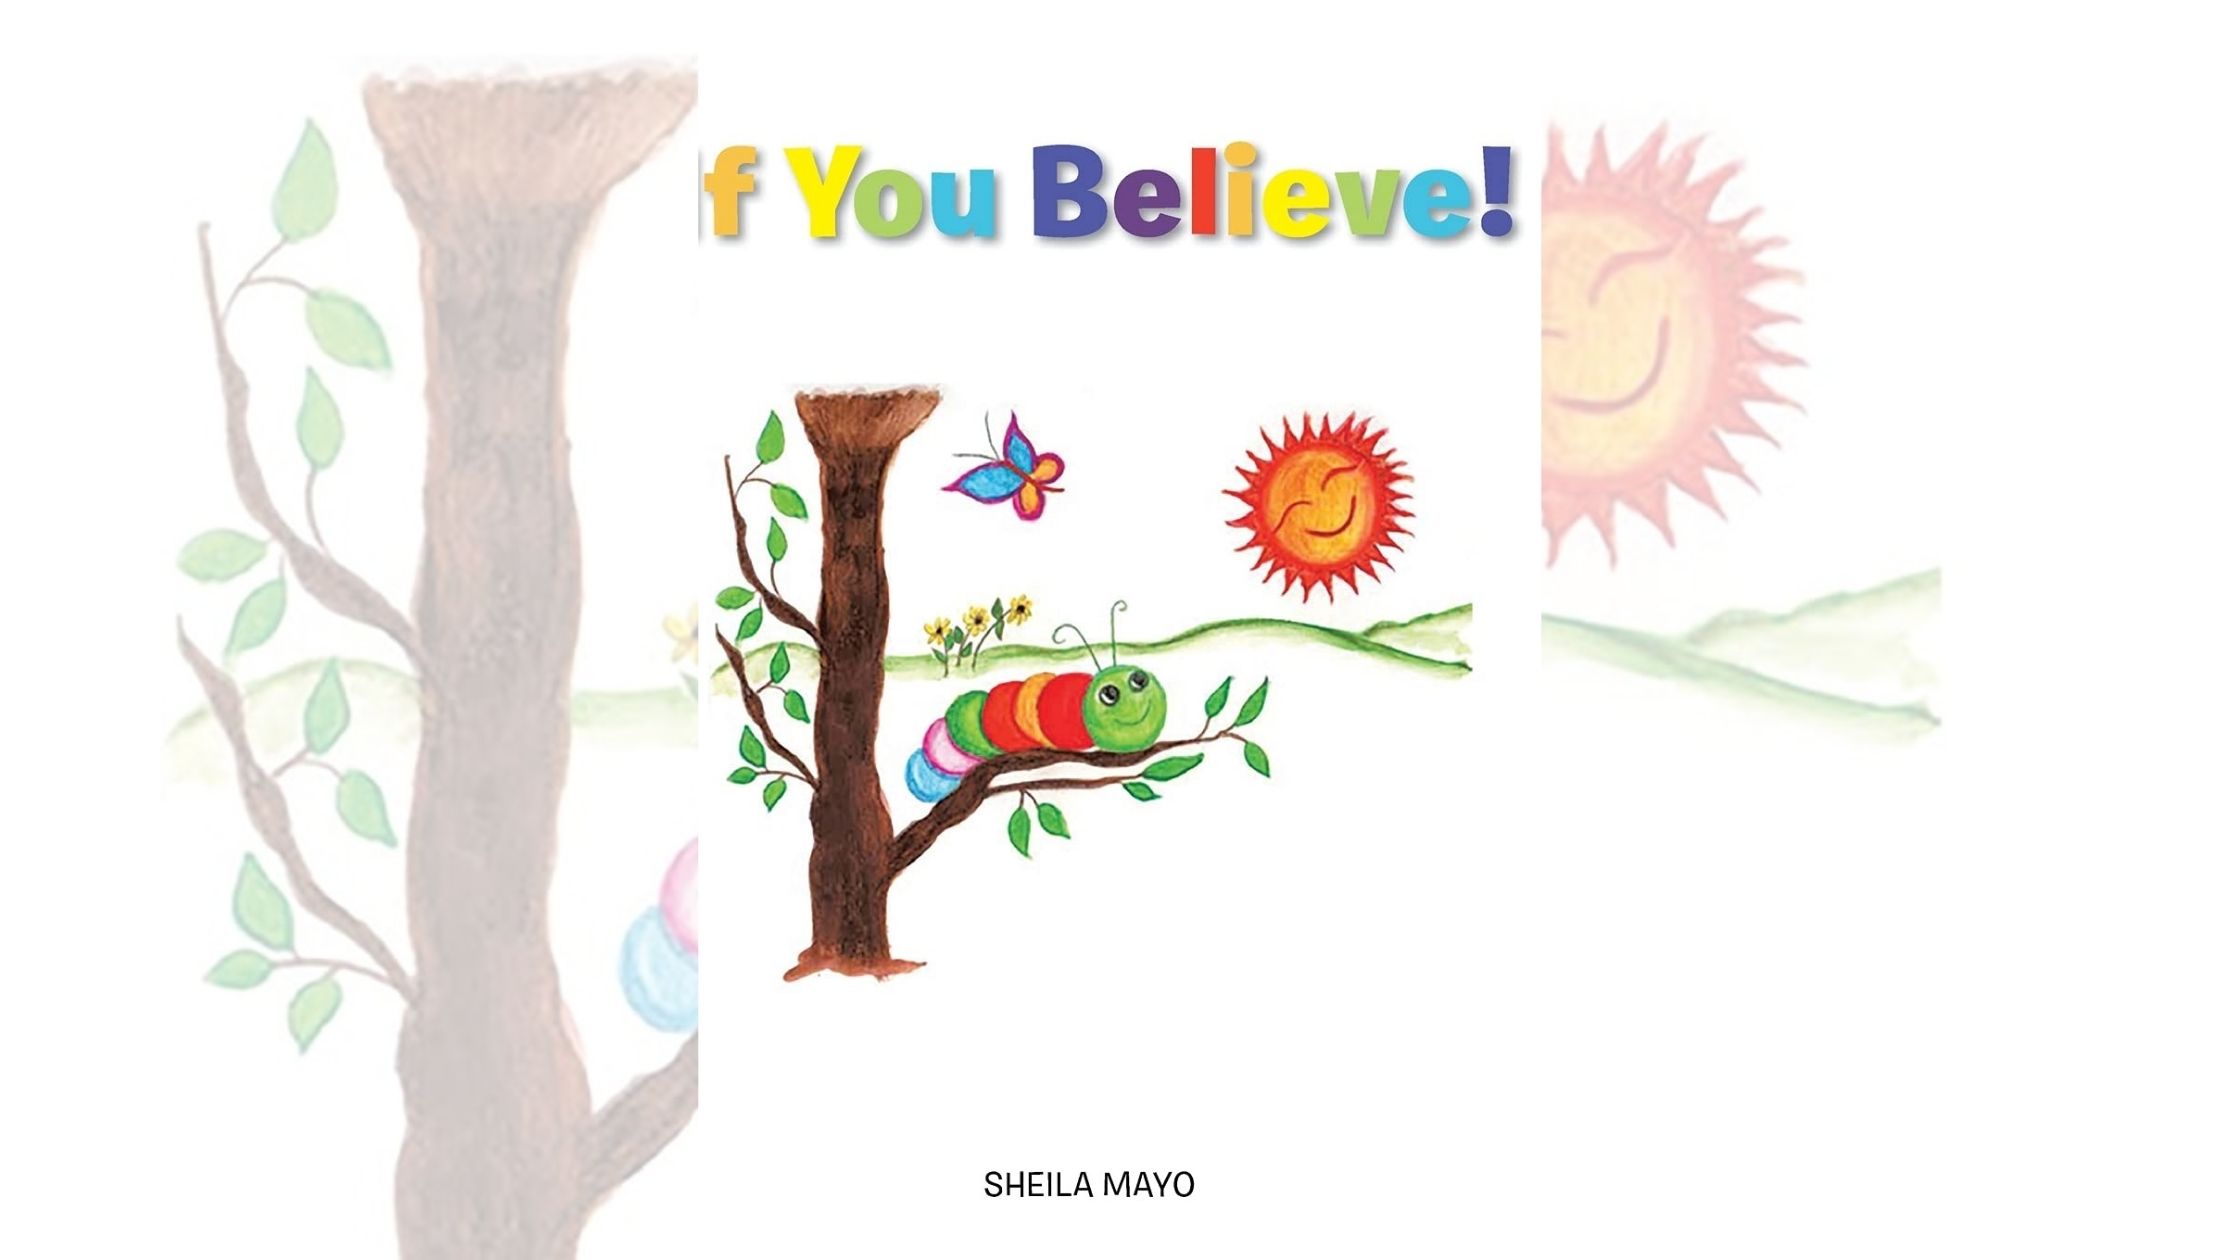 Sheila Mayo’s newly released “If You Believe!” is a sweet tale about metamorphosis and trusting that everything one needs can be found within